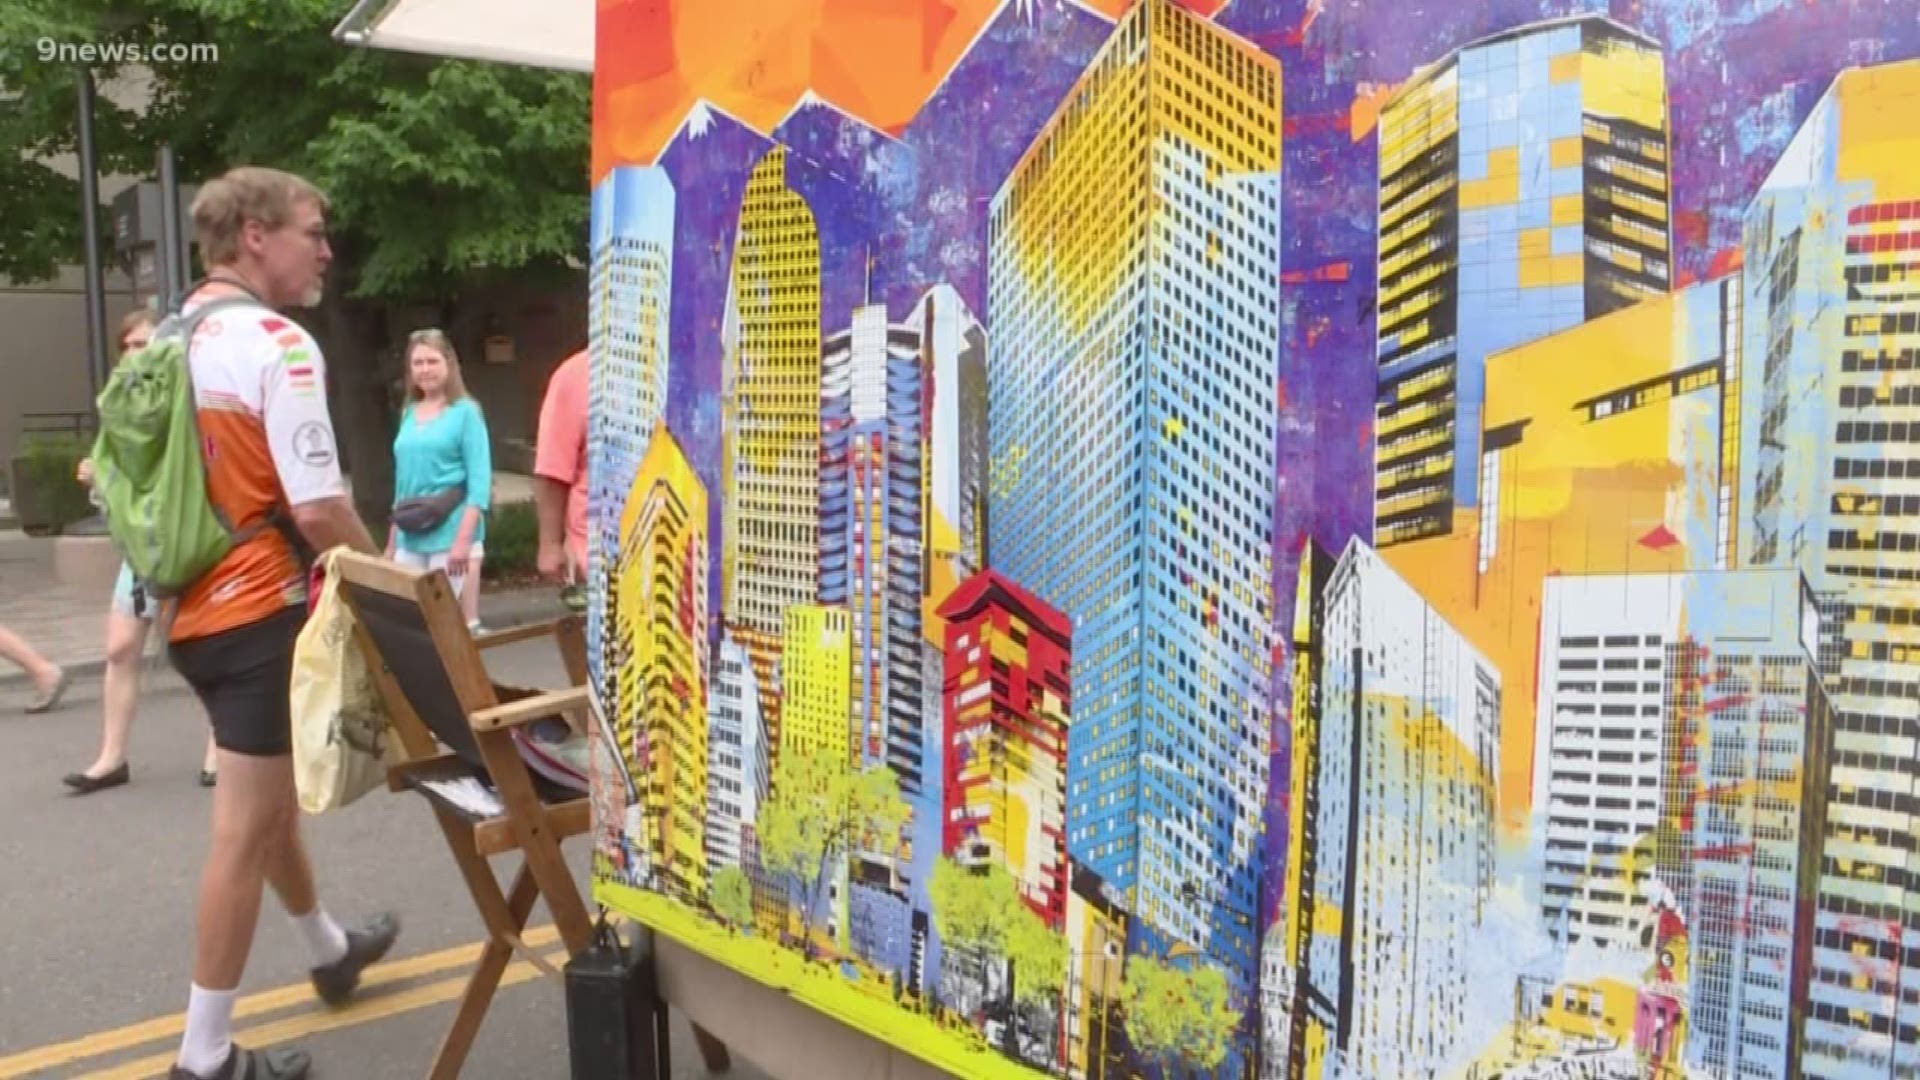 Tomorrow, art lovers from around the world will descend upon Denver for the cherry creek arts festival. It's a three-day event with music, beer and of course, art.